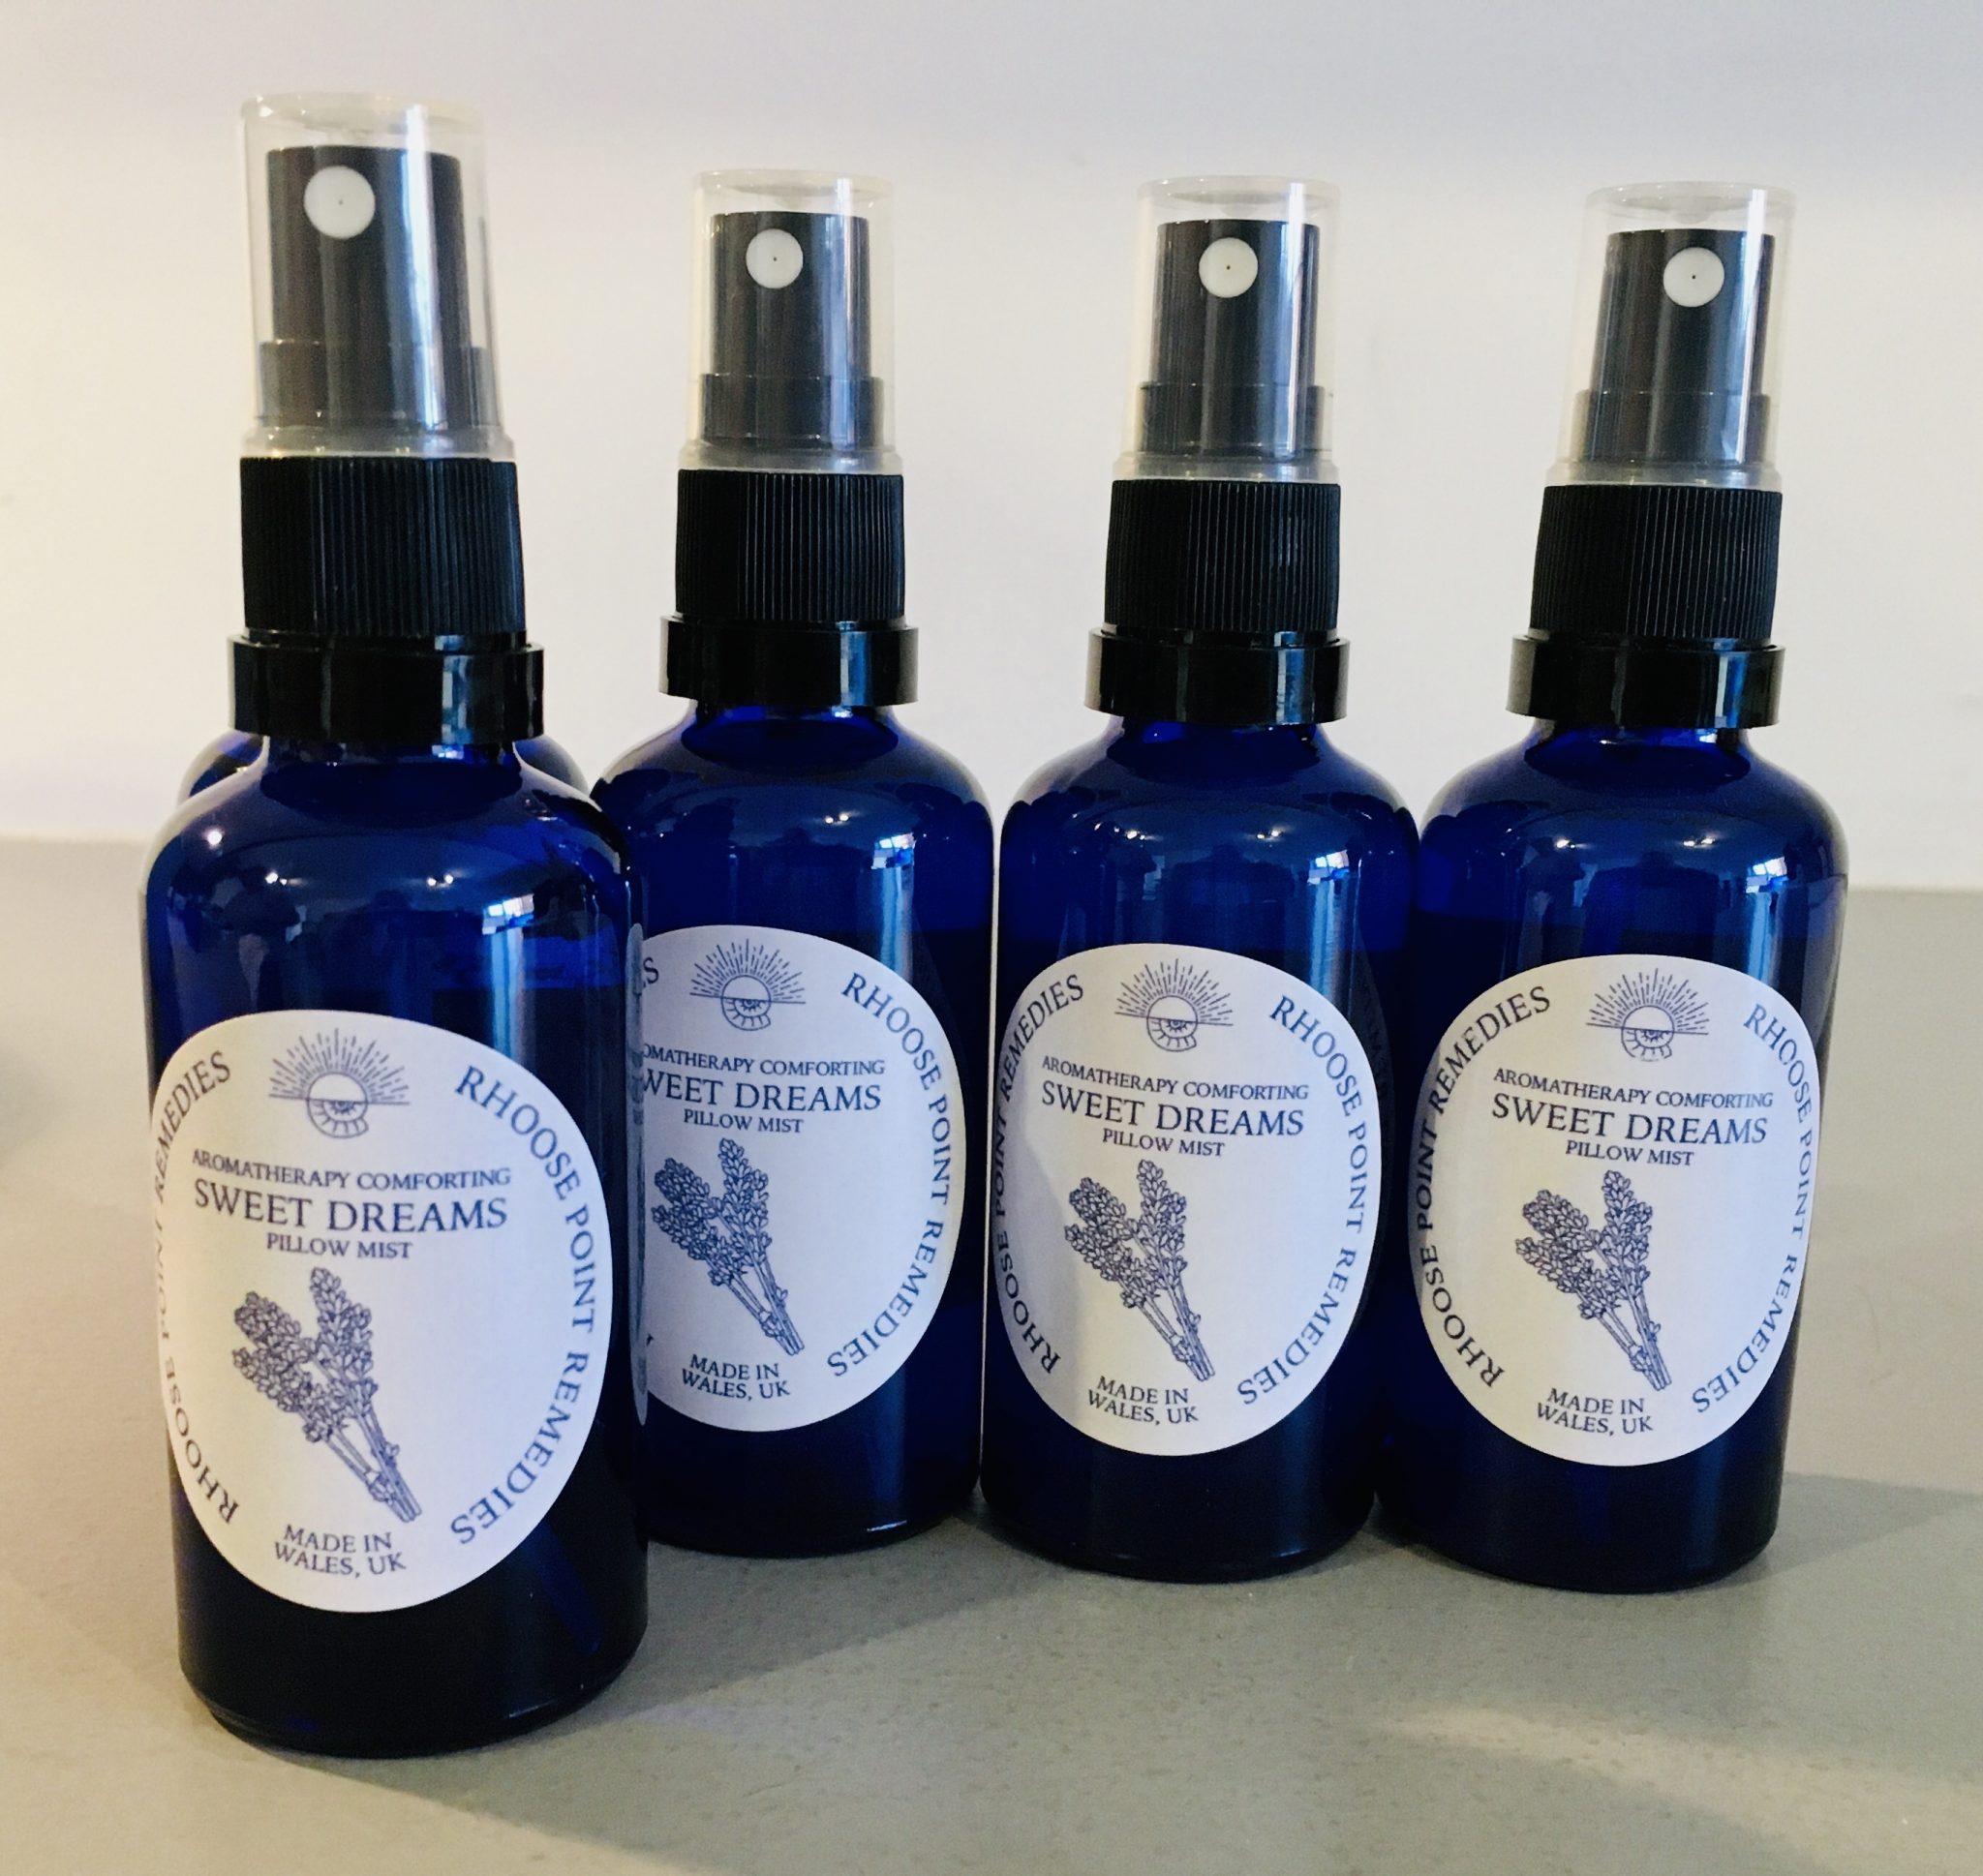 Sweet Dreams™ Aromatherapy Comforting Pillow Mist Spray - formulated to